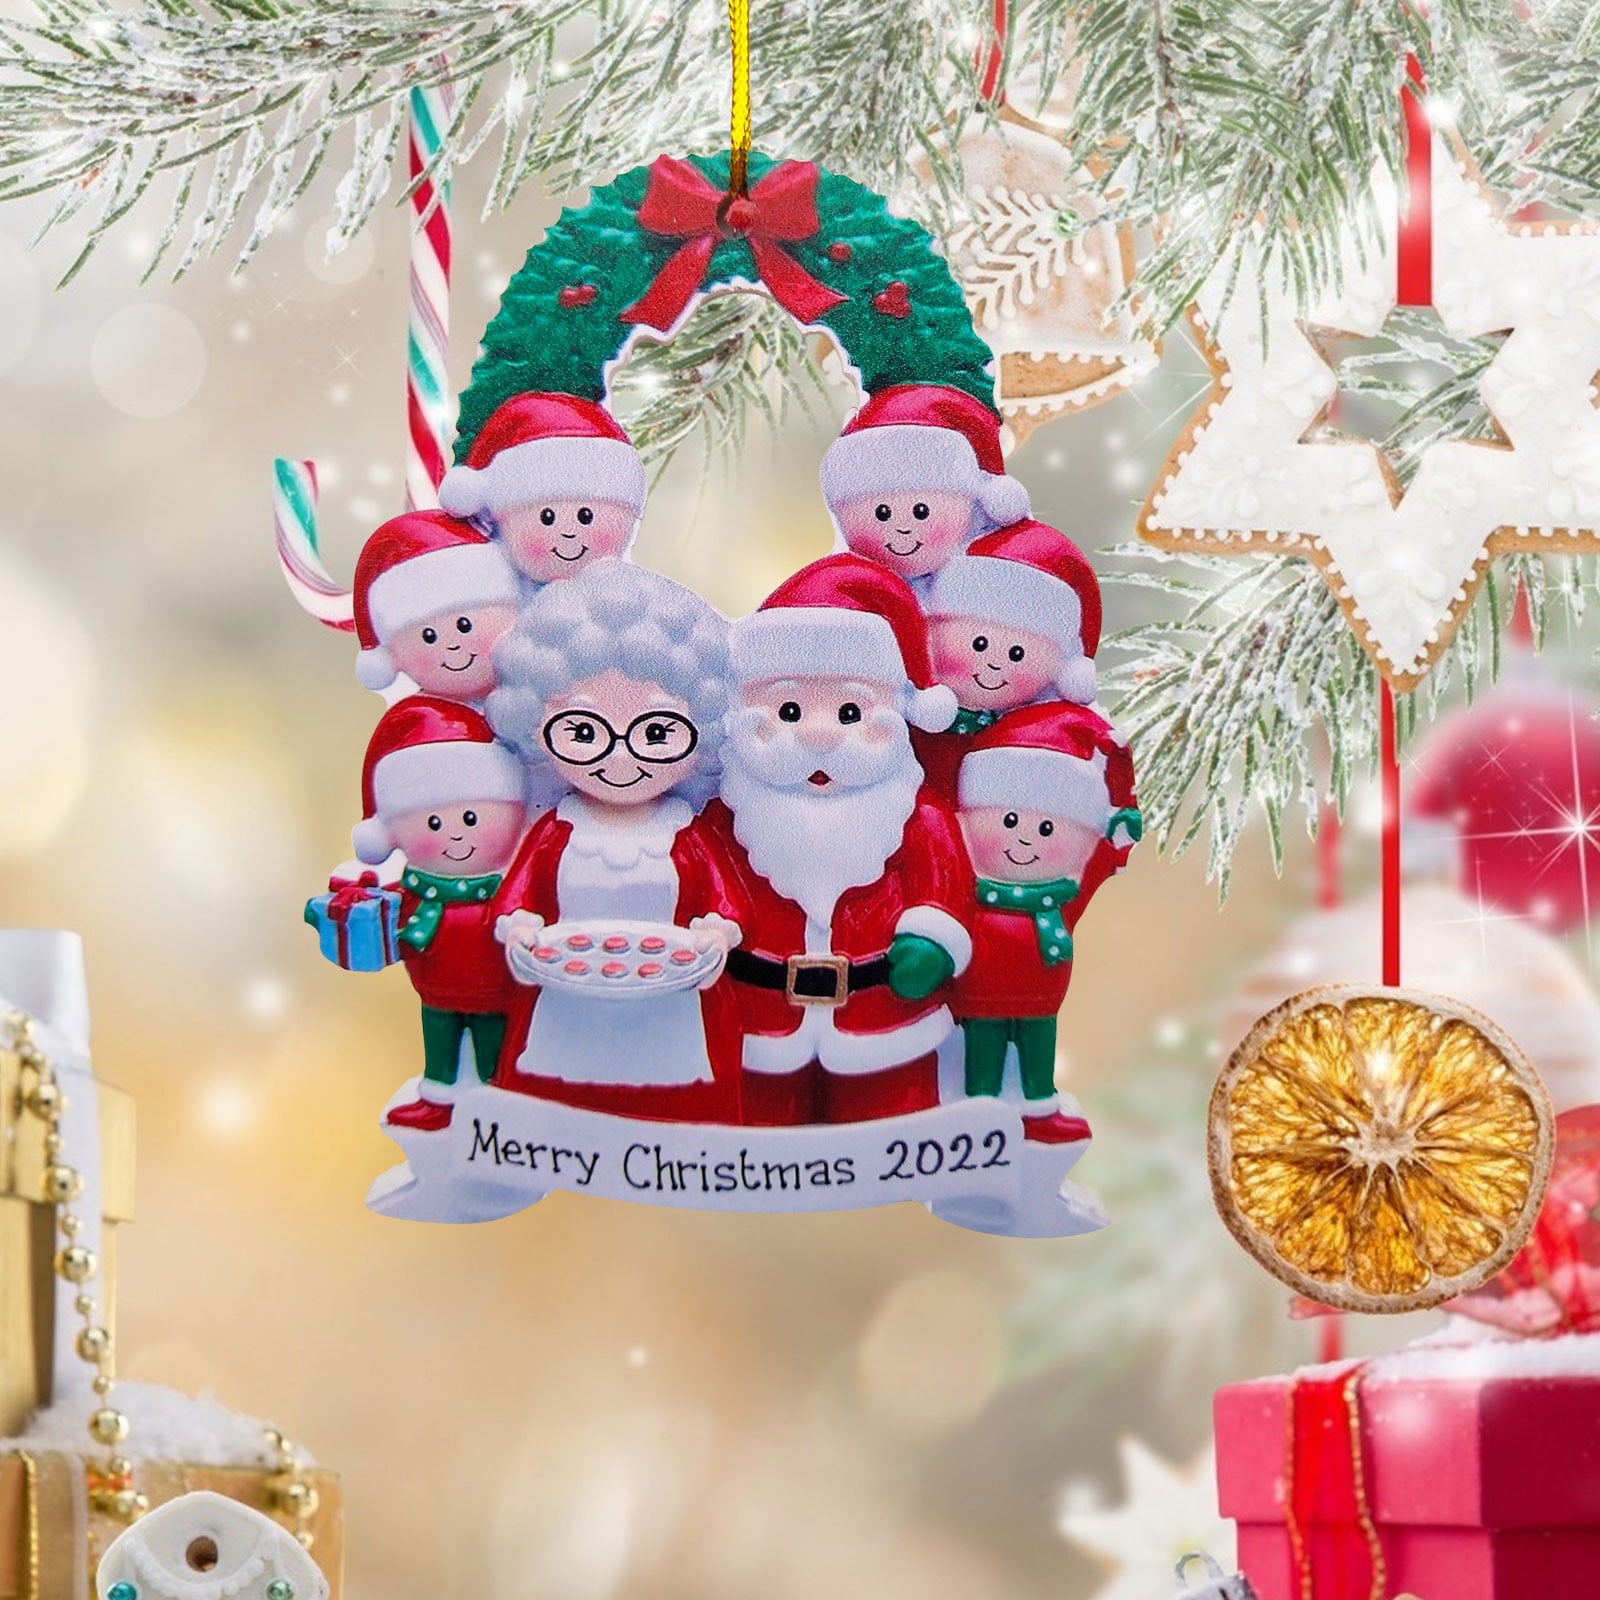 Seisoup Christmas Ornaments 2022 - Cartoon Ornament for Christmas Tree  Decor Ornaments Christmas Hanging Decorative Home Decoration Gift for  Family